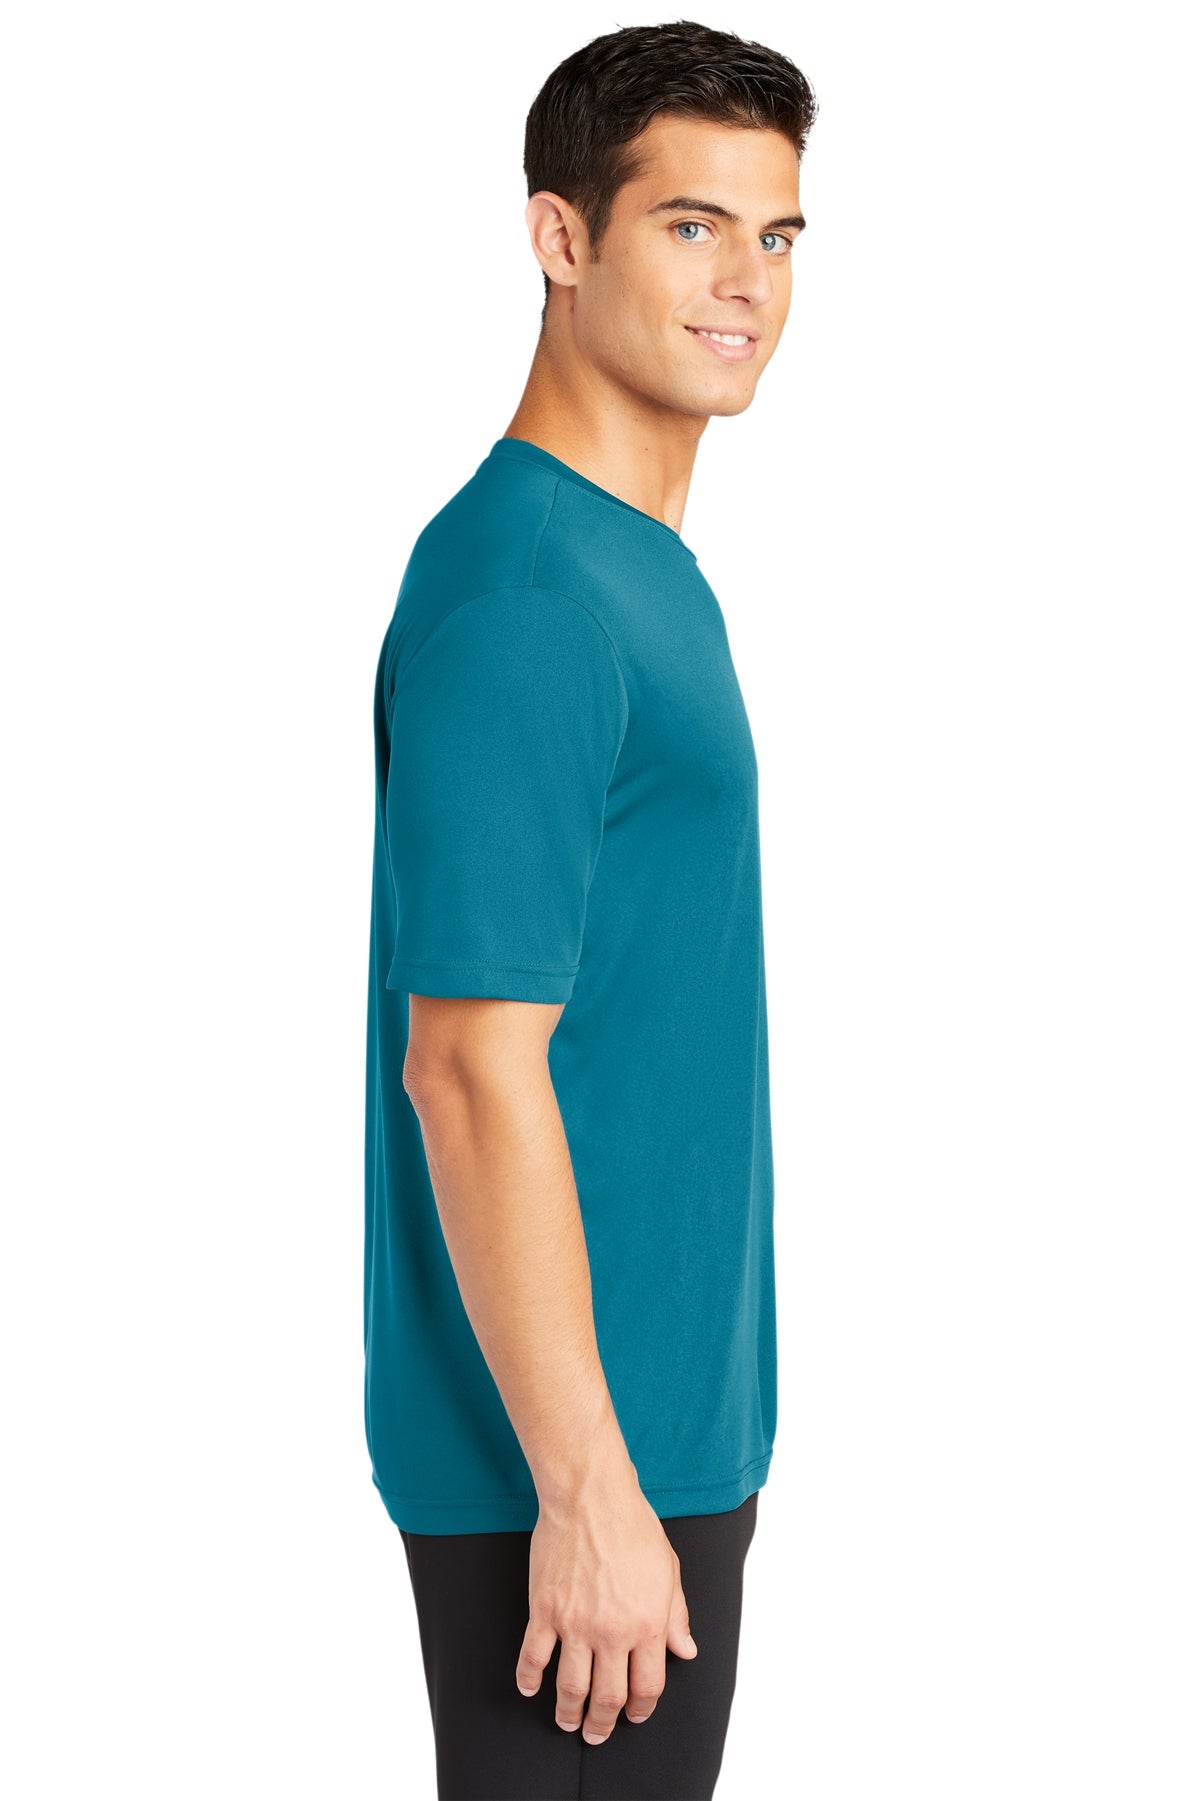 Sport-Tek Tall PosiCharge Branded Competitor Tee's, Tropic Blue